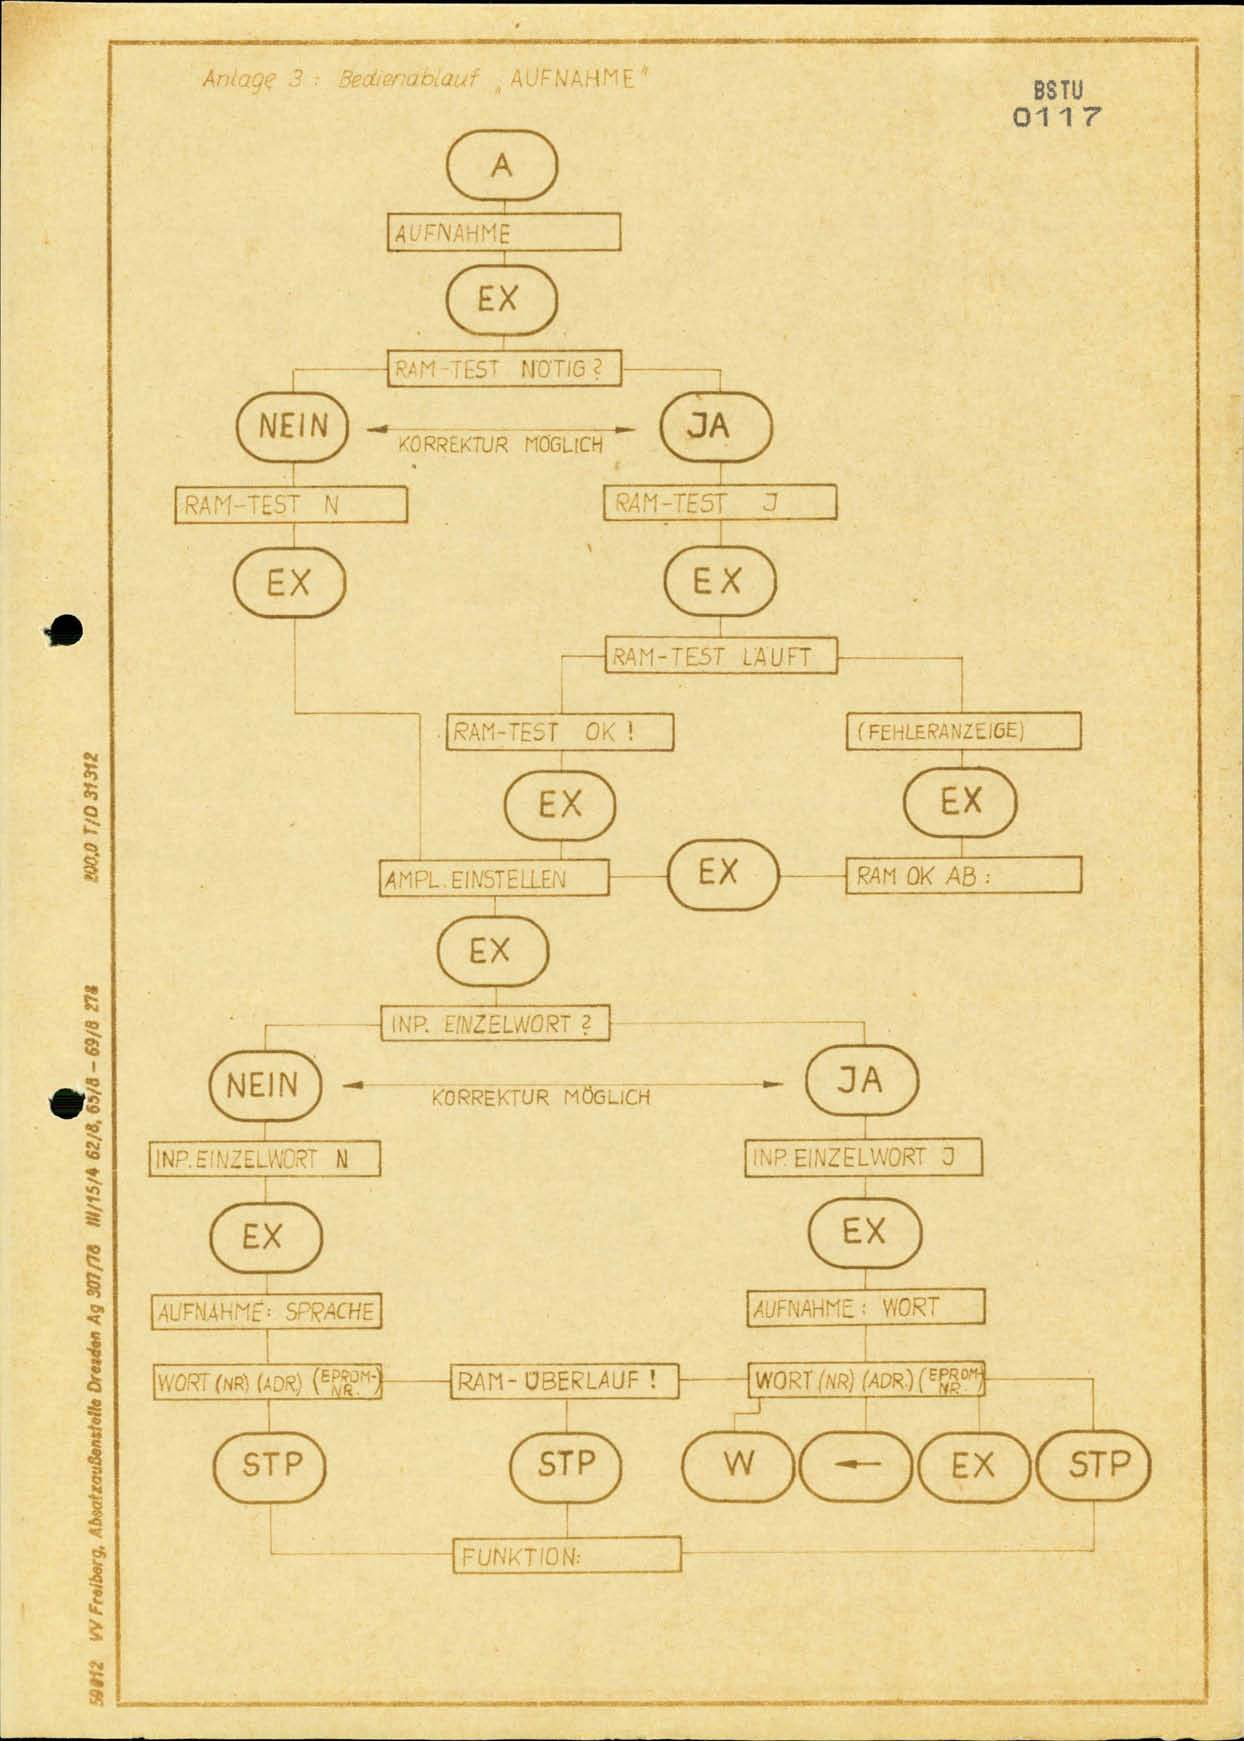 Flow chart that shows keypresses and the displayed text for recording words.